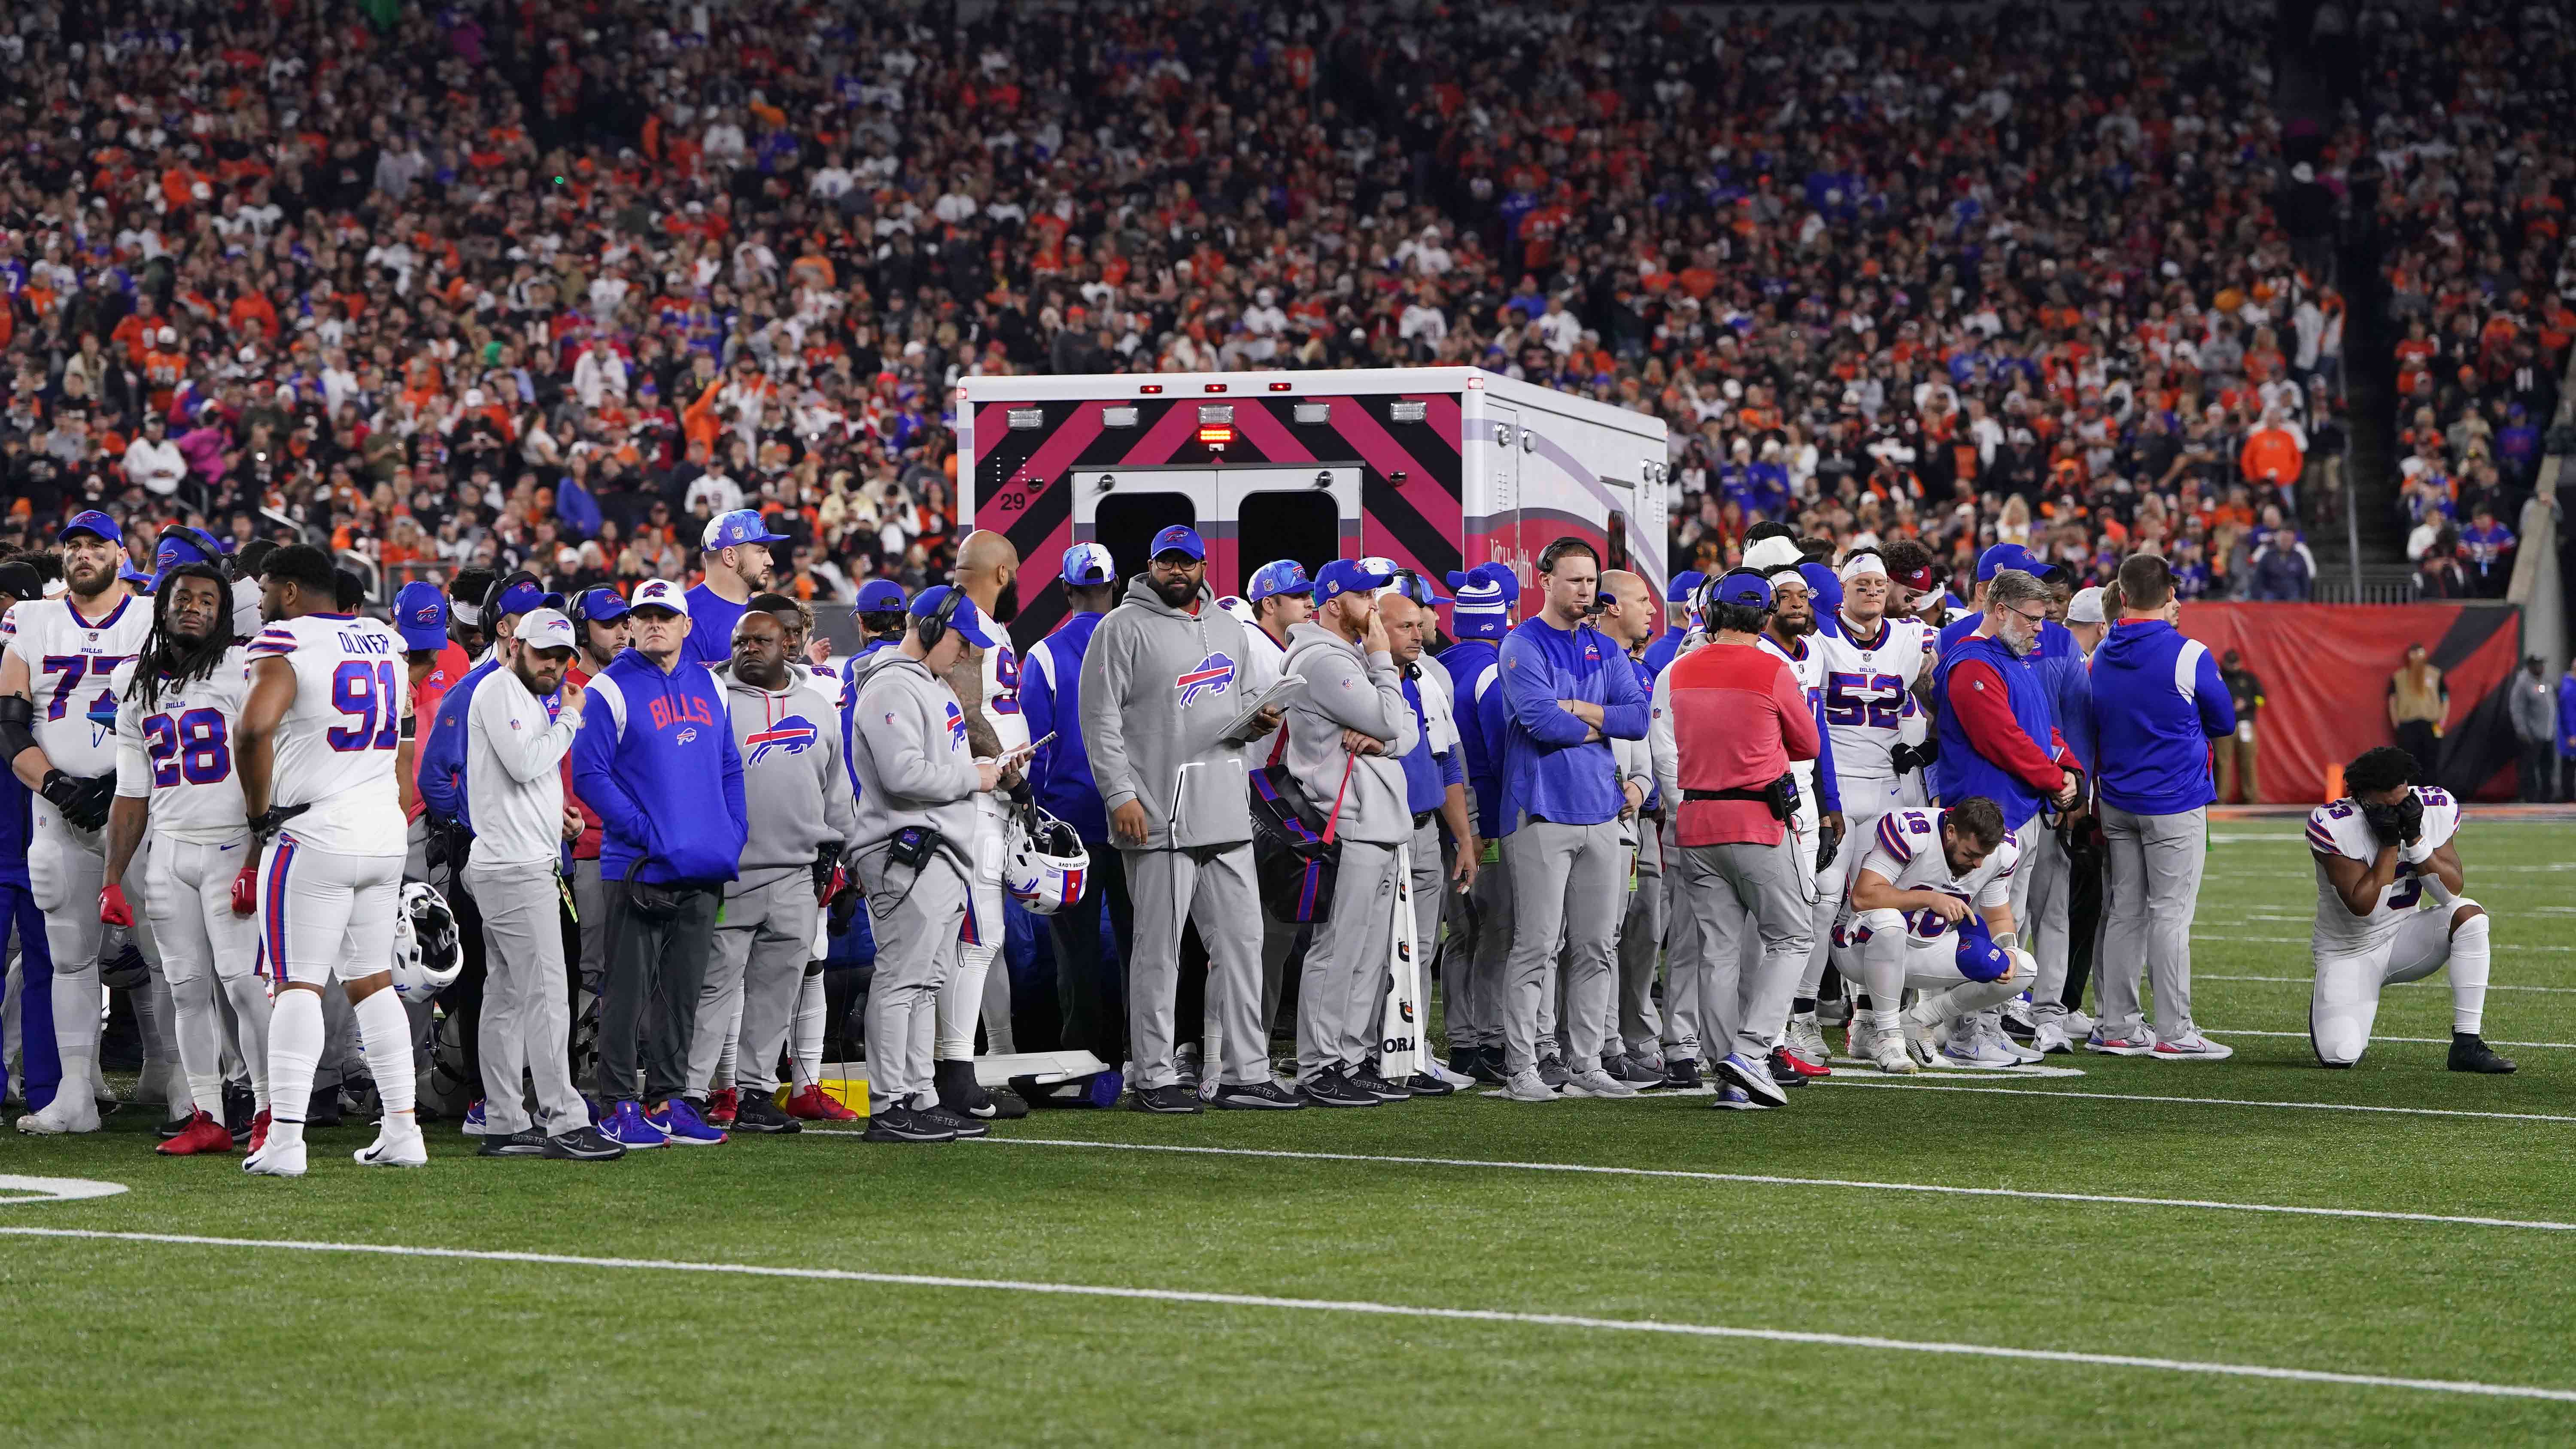 NFL will not resume Bills-Bengals game, AP sources say